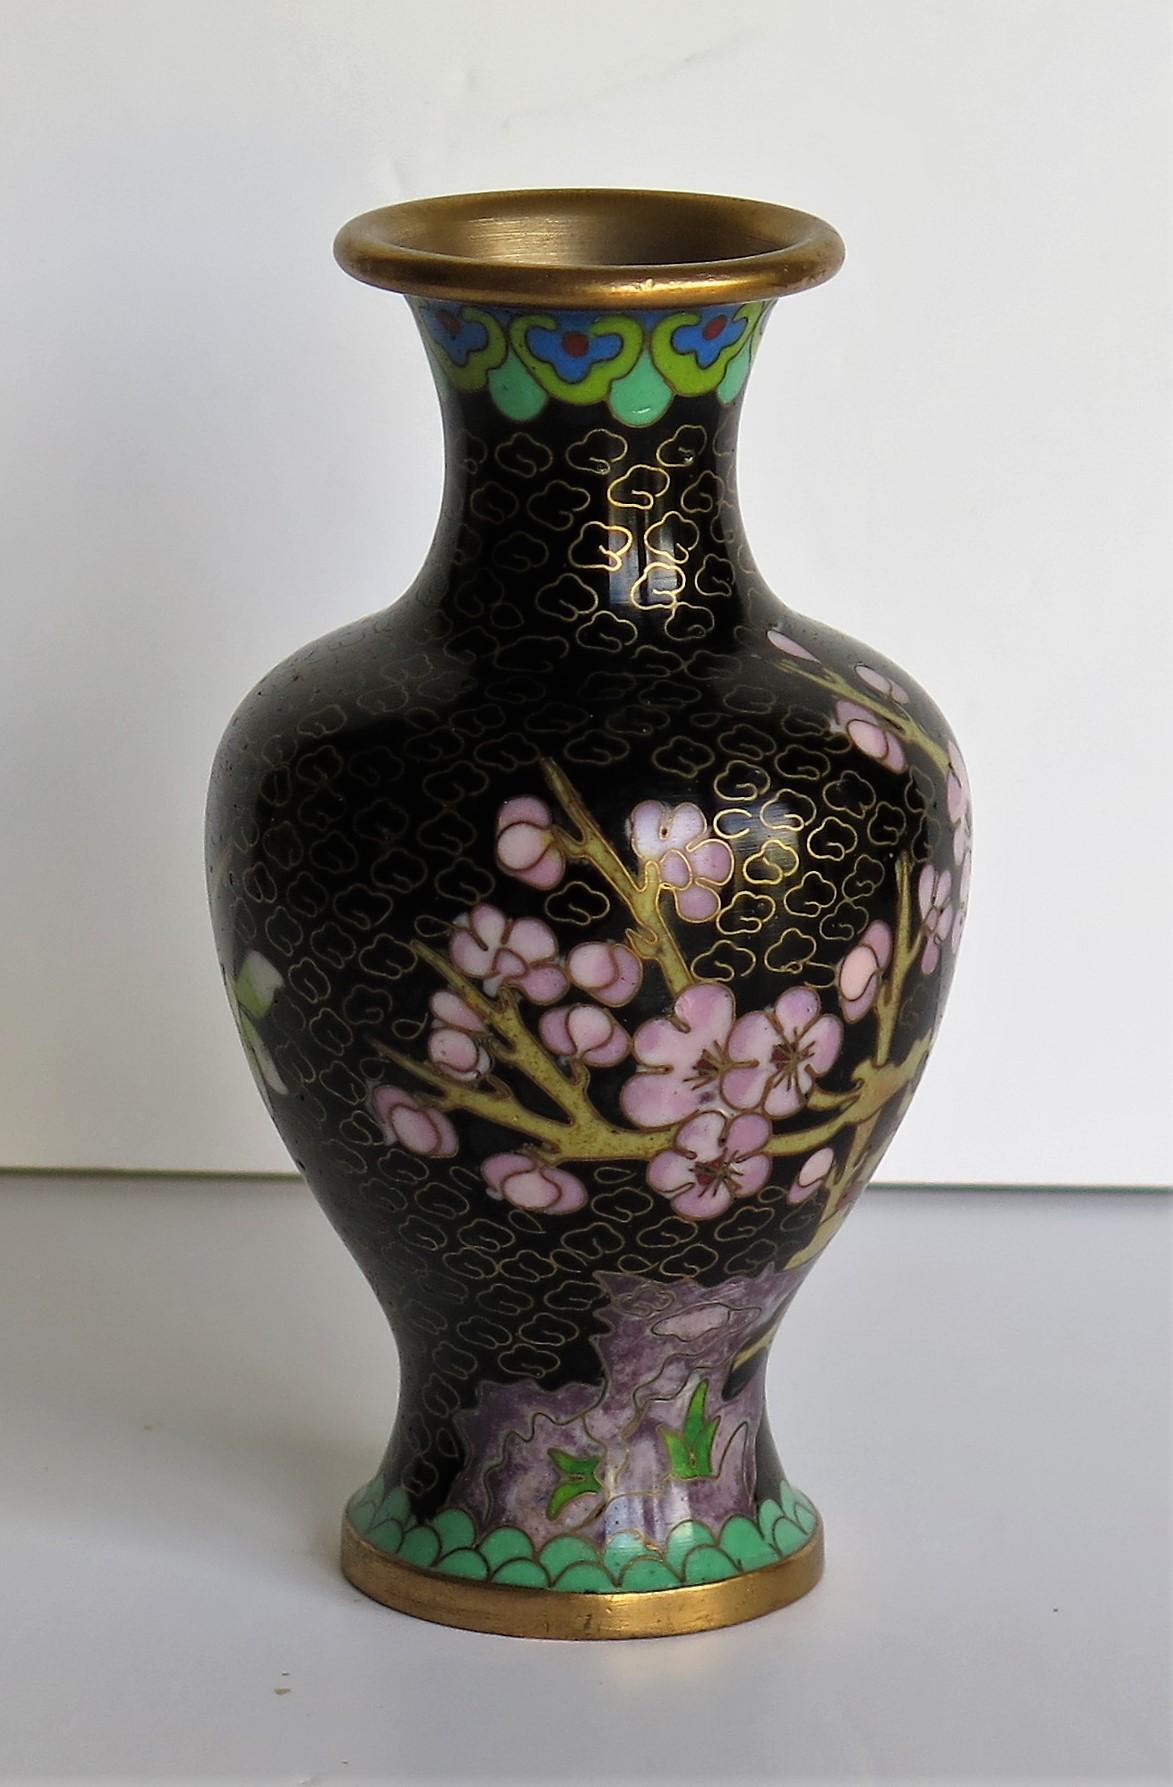 Cloissoné Chinese Cloisonne Vase with Yellow Bird and Blossoms, circa 1940